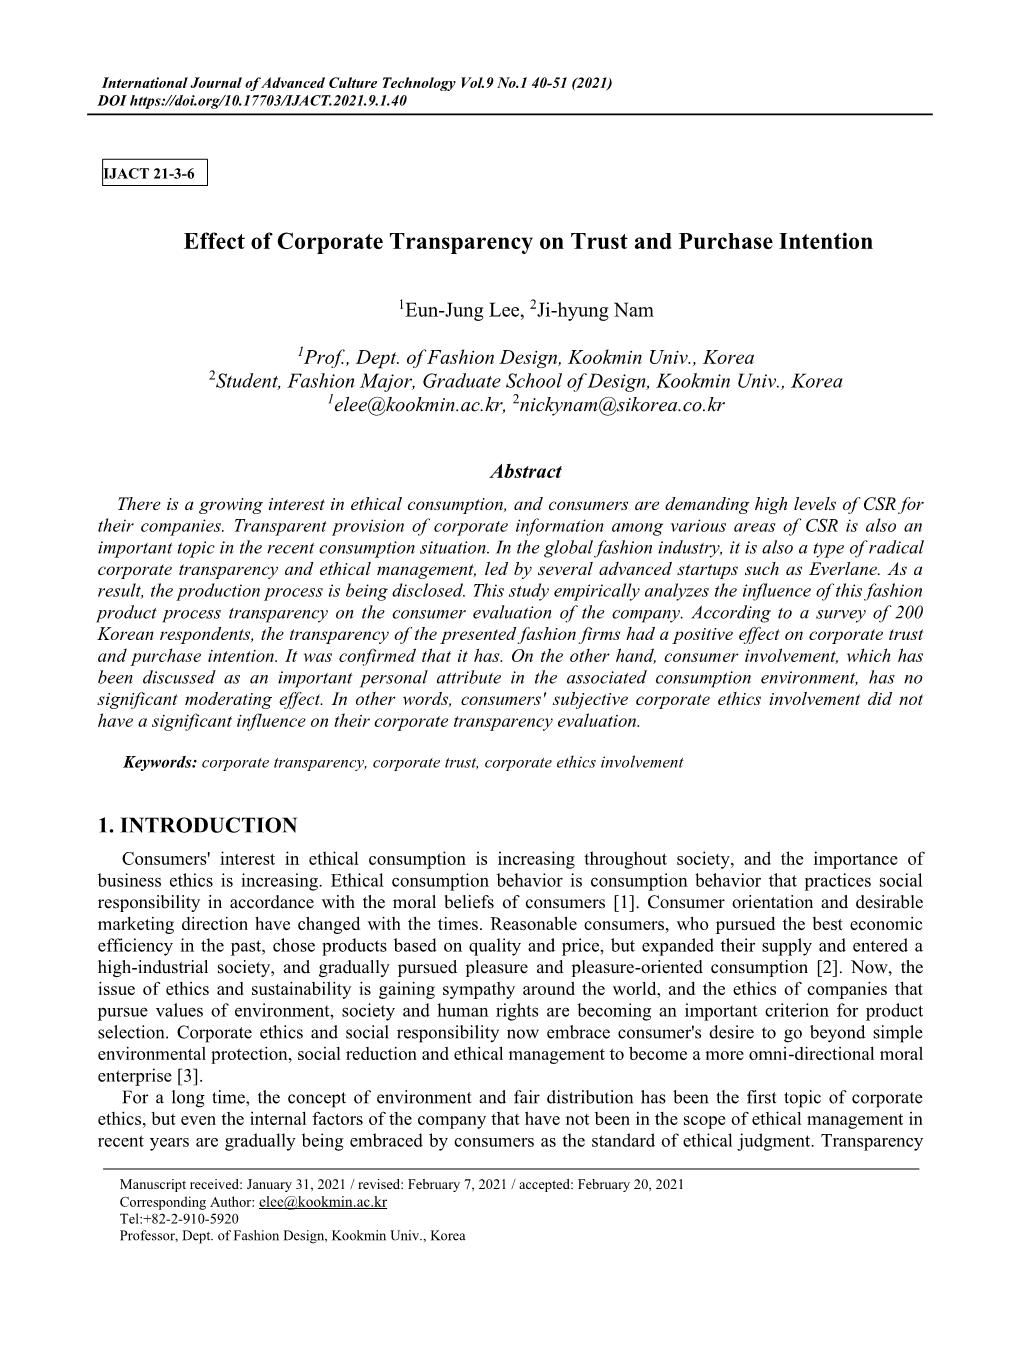 Effect of Corporate Transparency on Trust and Purchase Intention